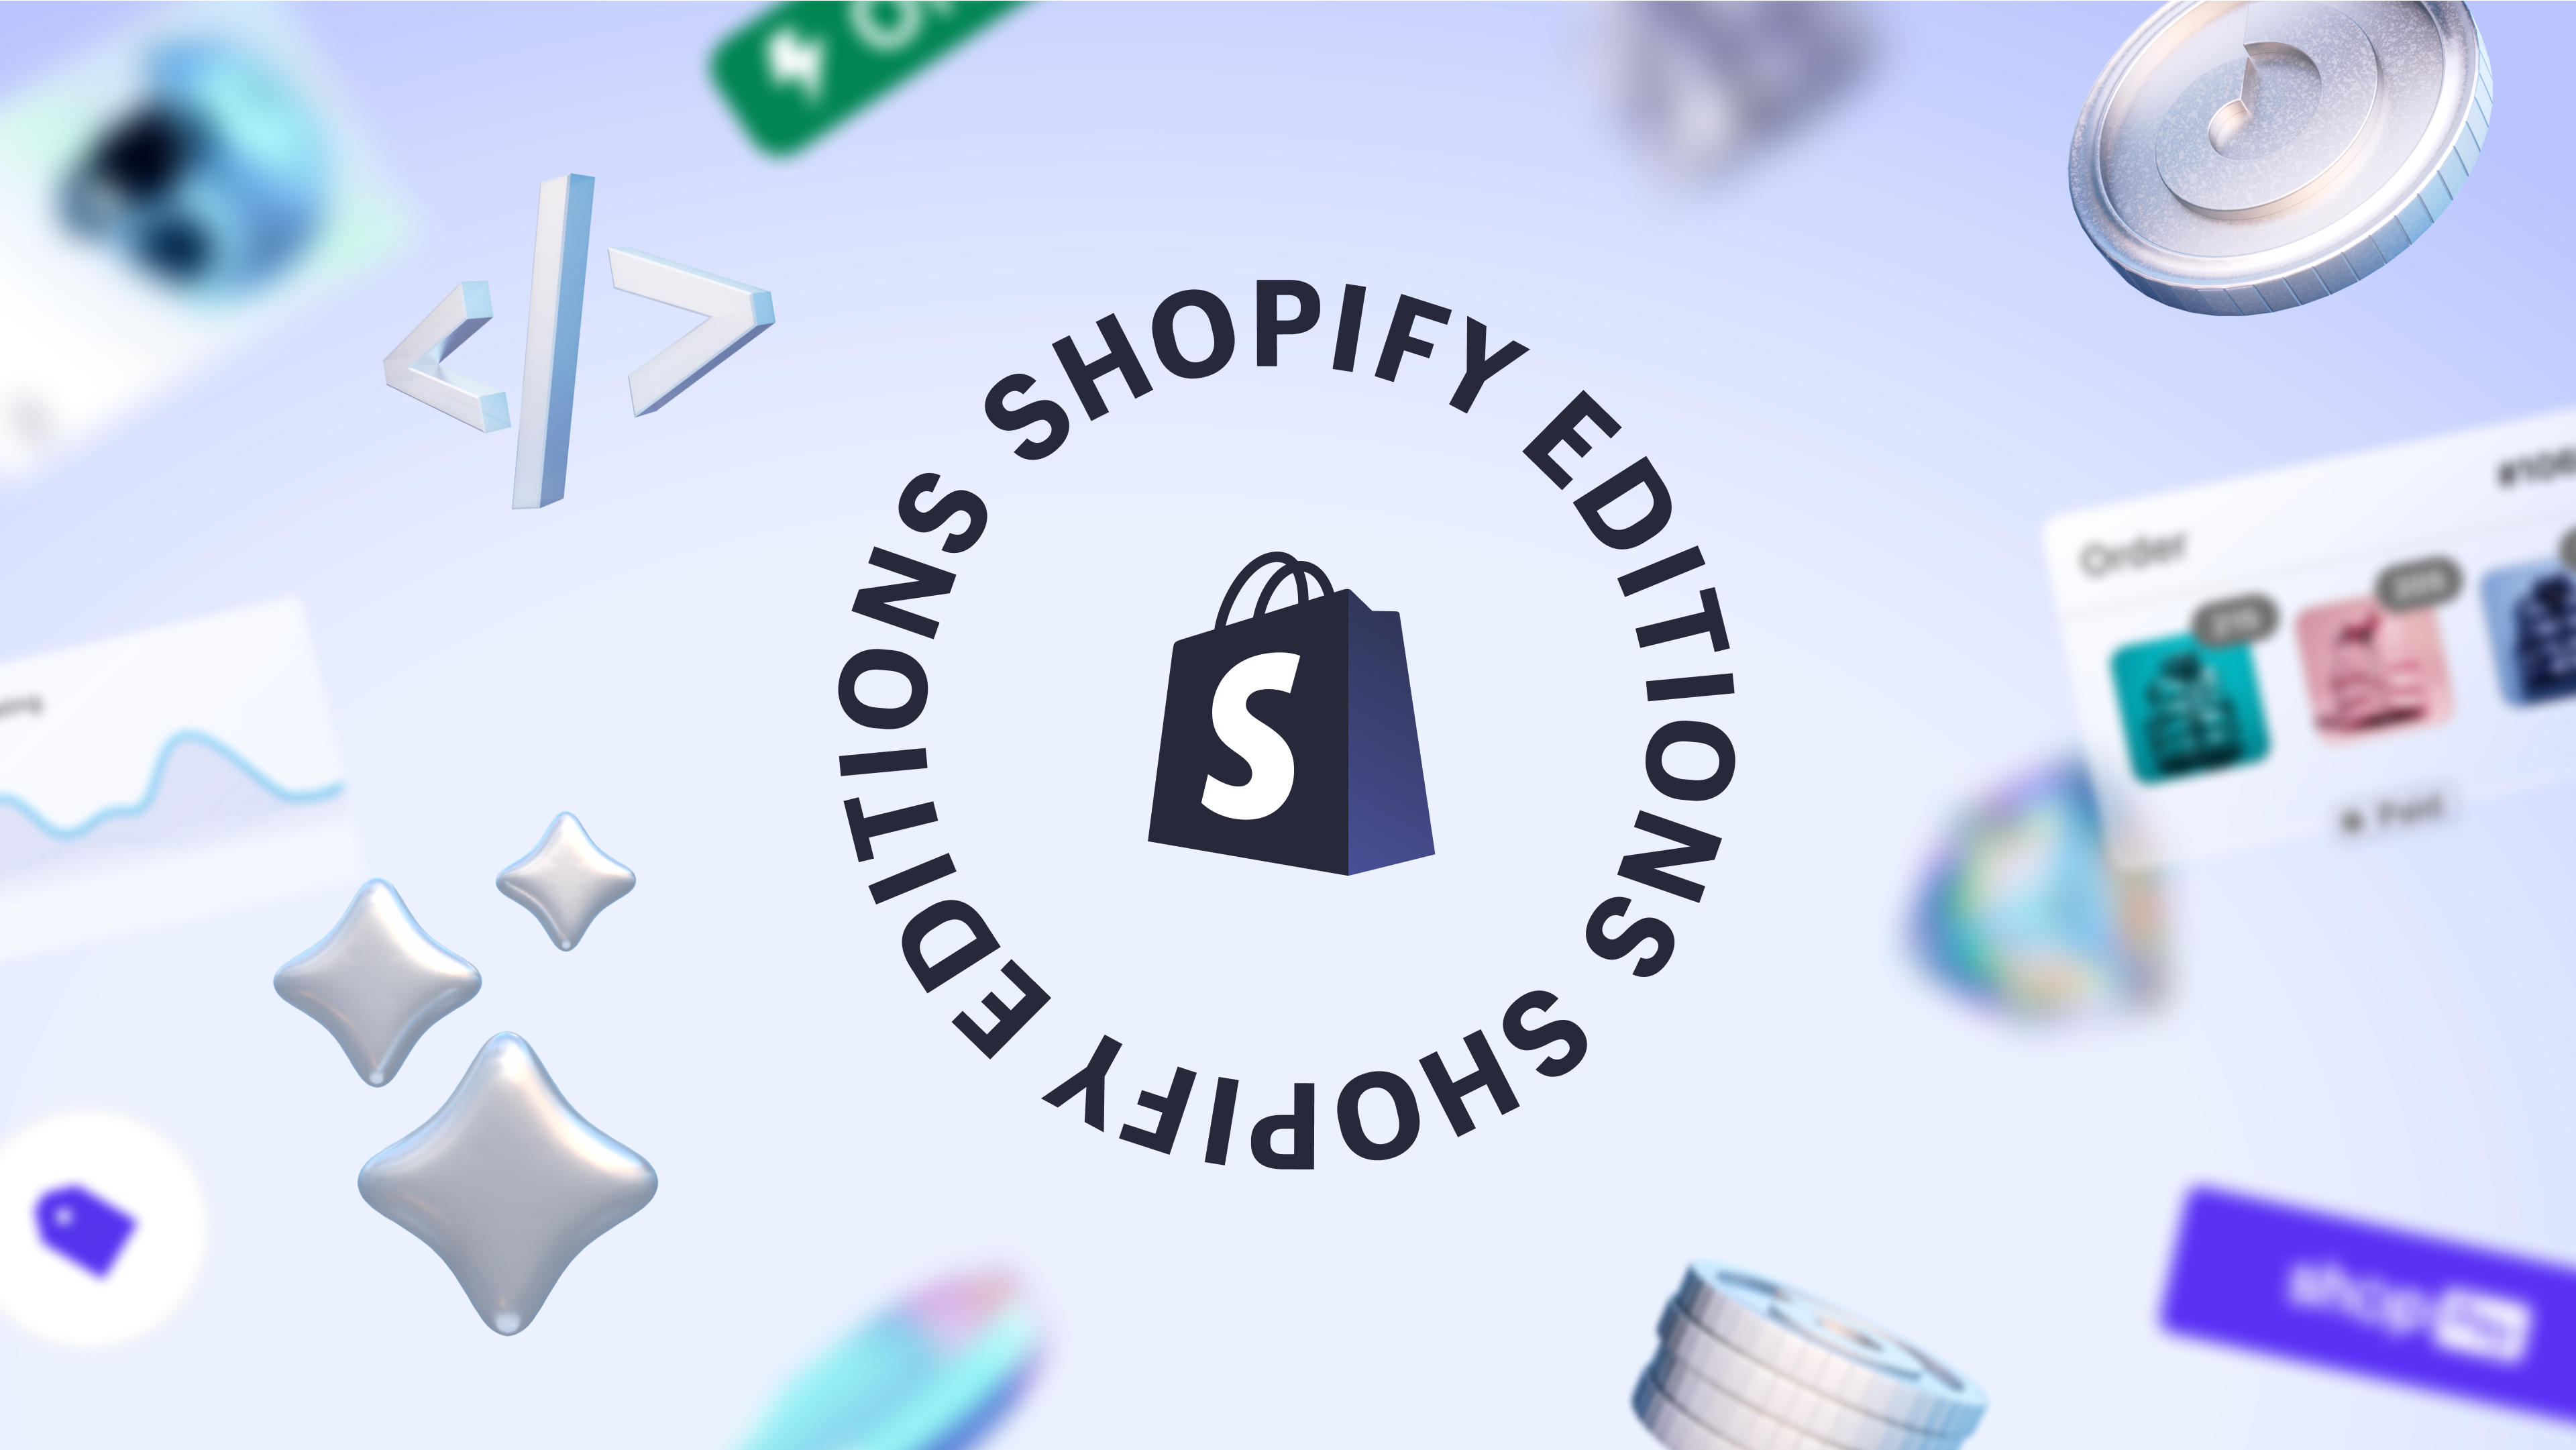 Sort/Filter by discounted products? - Shopify Community